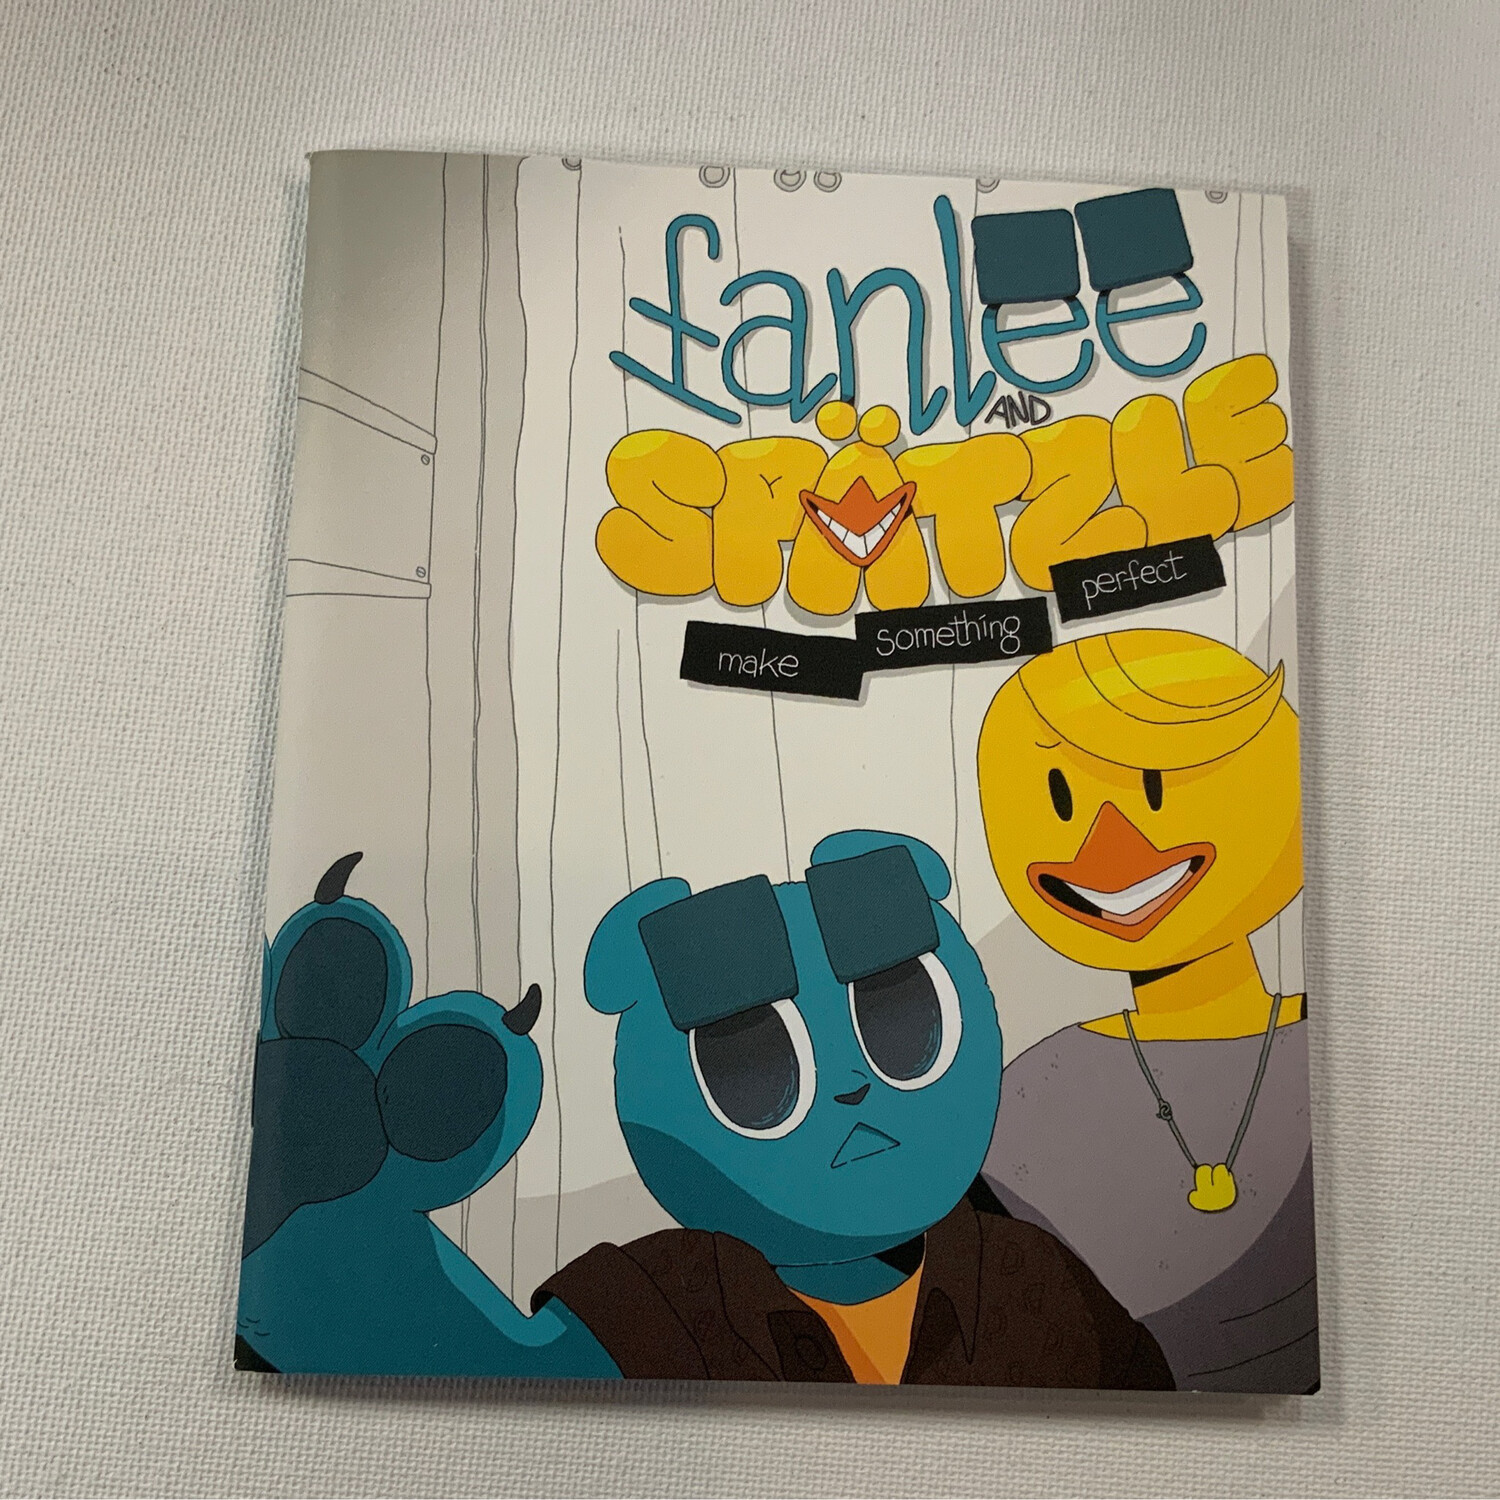 Fanlee and Spatzle - Book by Pseudonym Jones